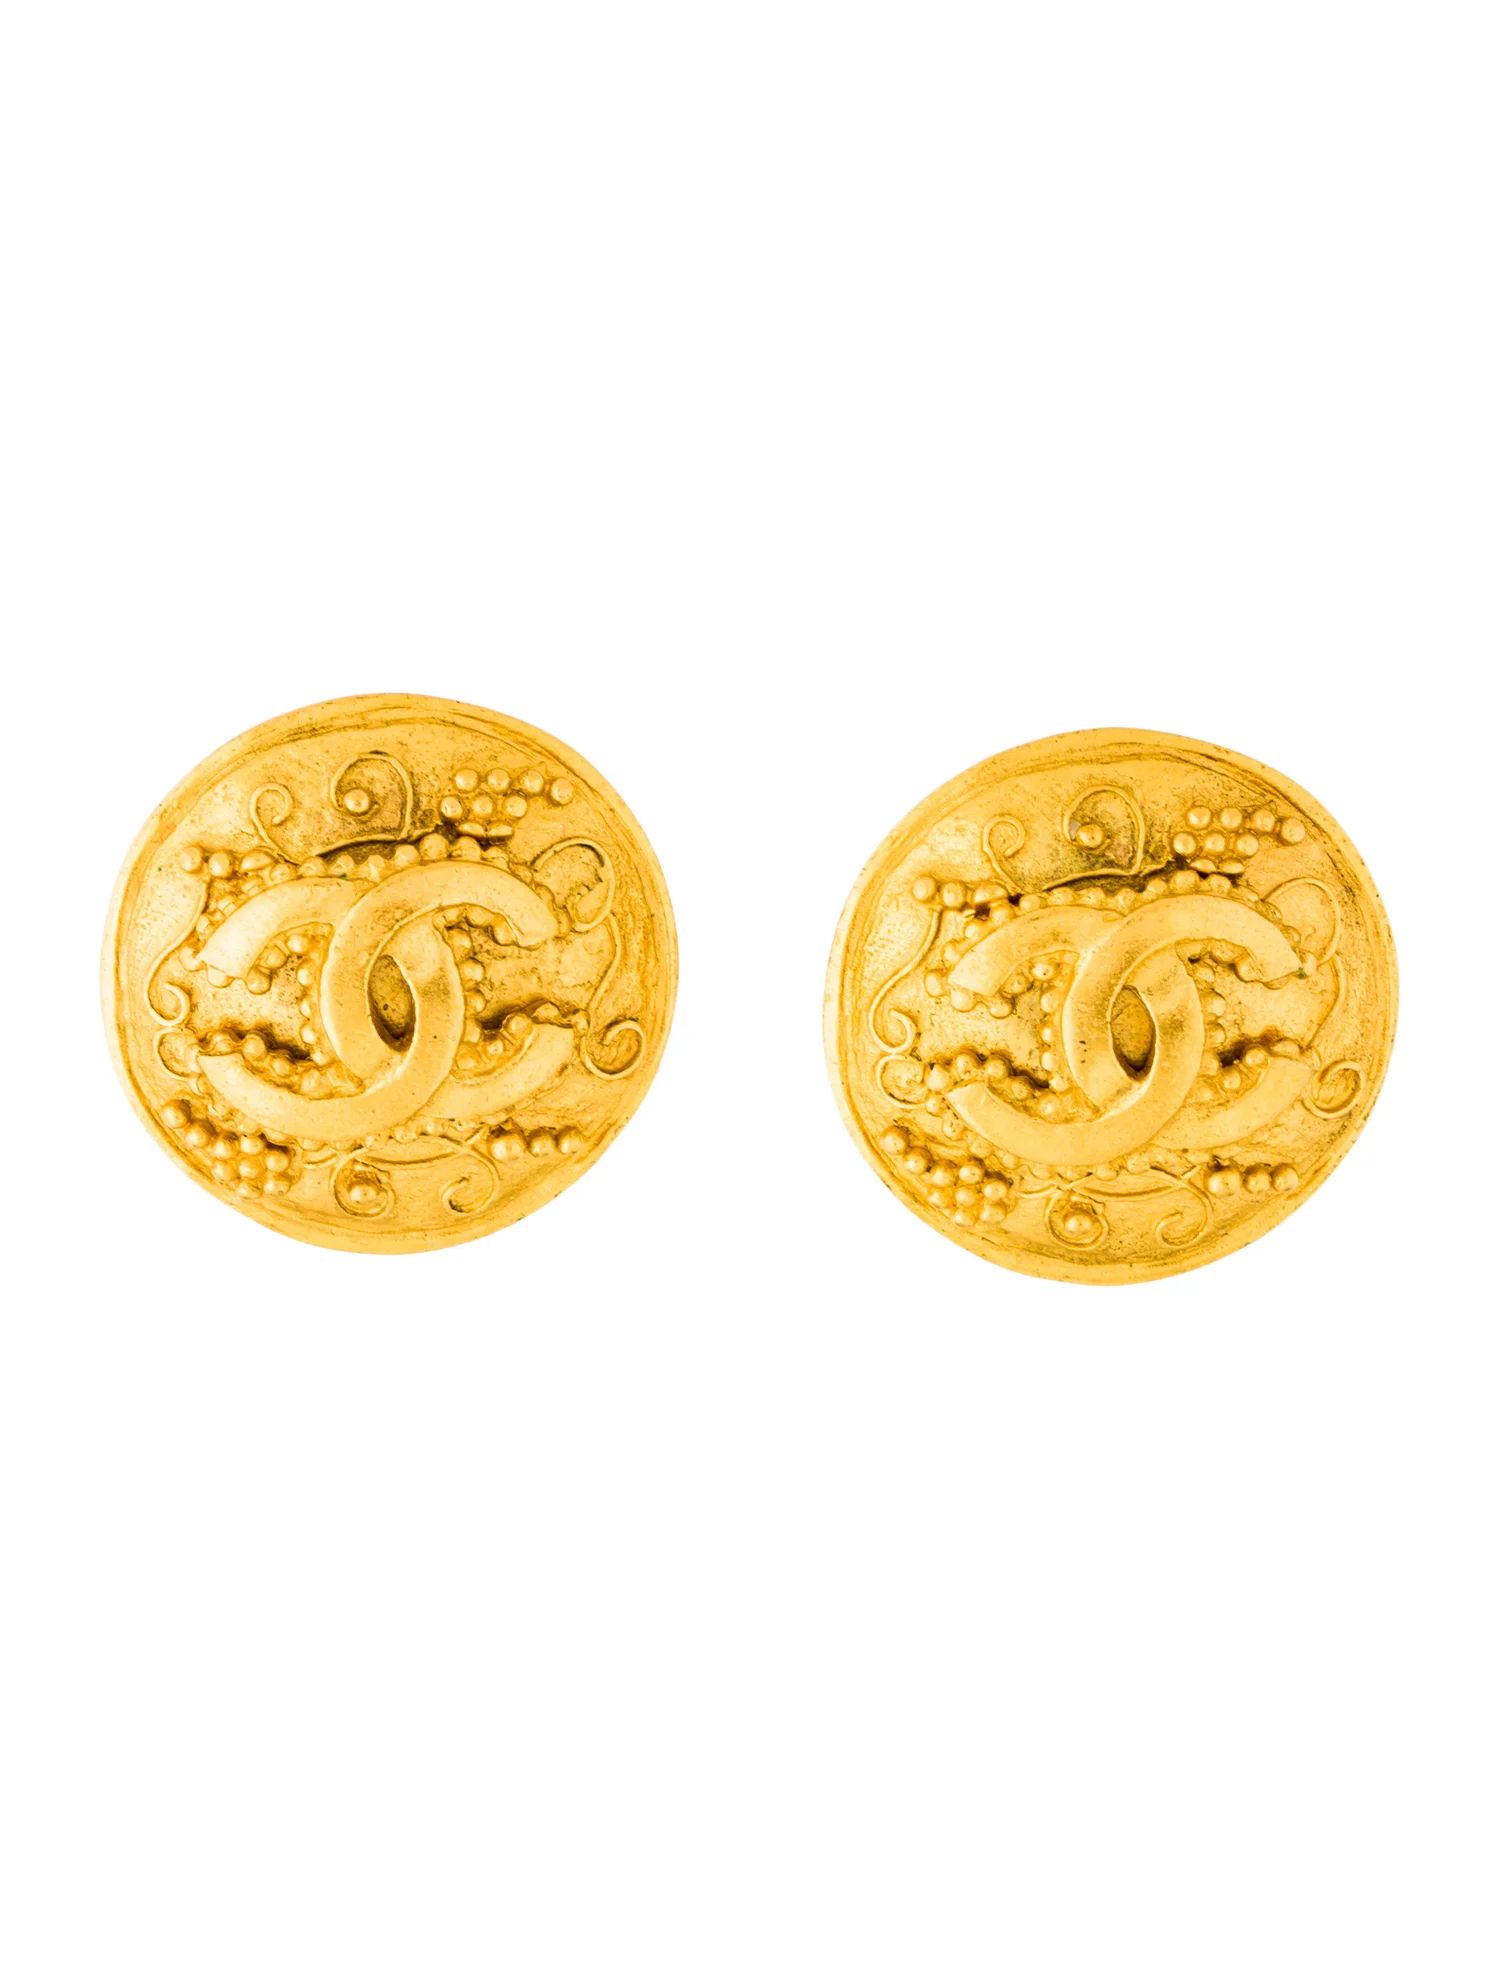 Chanel Vintage CC Clip-On Earrings - Earrings -
          CHA383343 | The RealReal | The RealReal